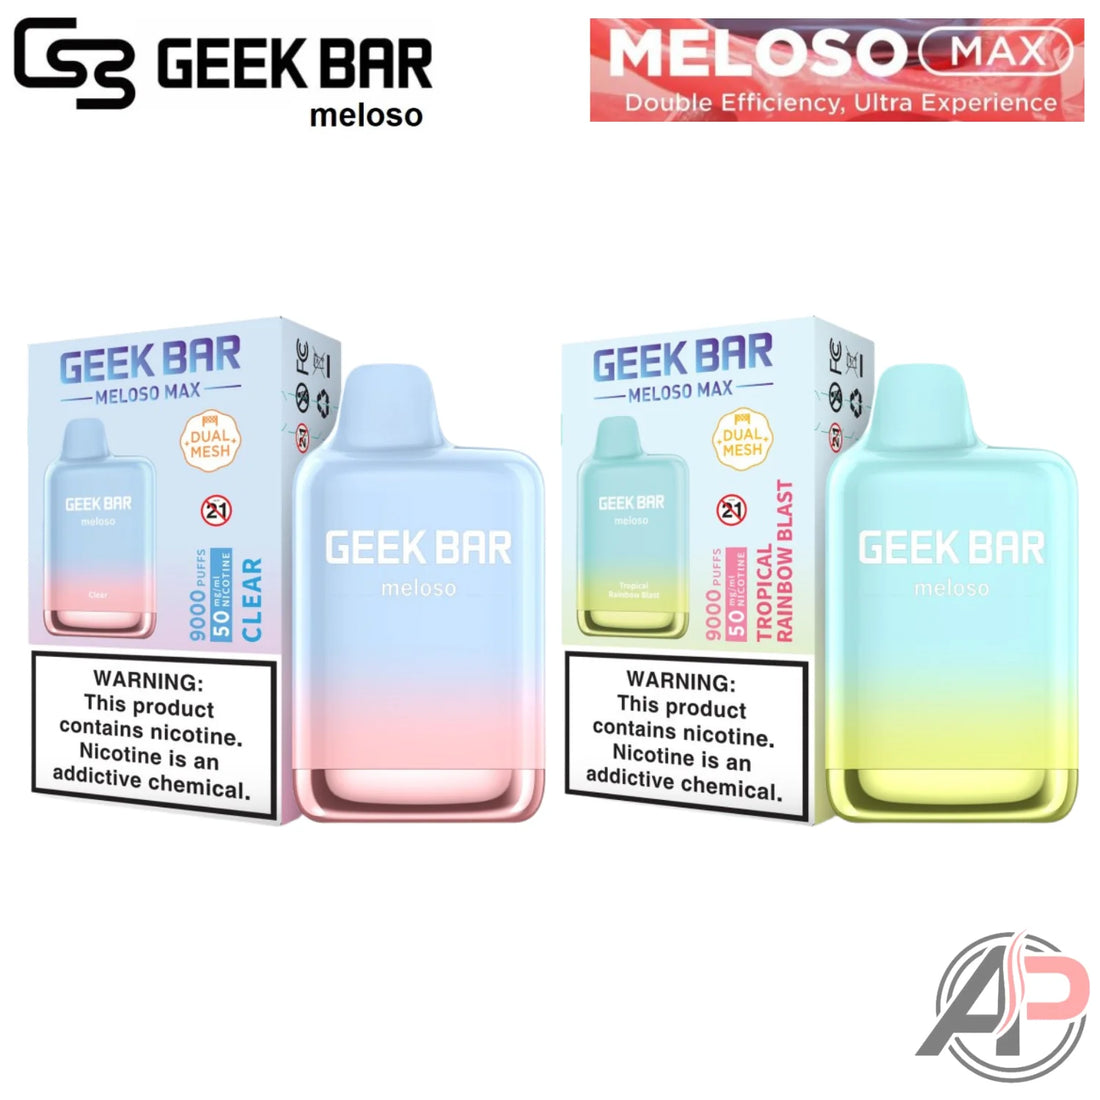 Guide to Geek Bar Meloso Max 9000 Puff Disposable Vape Device